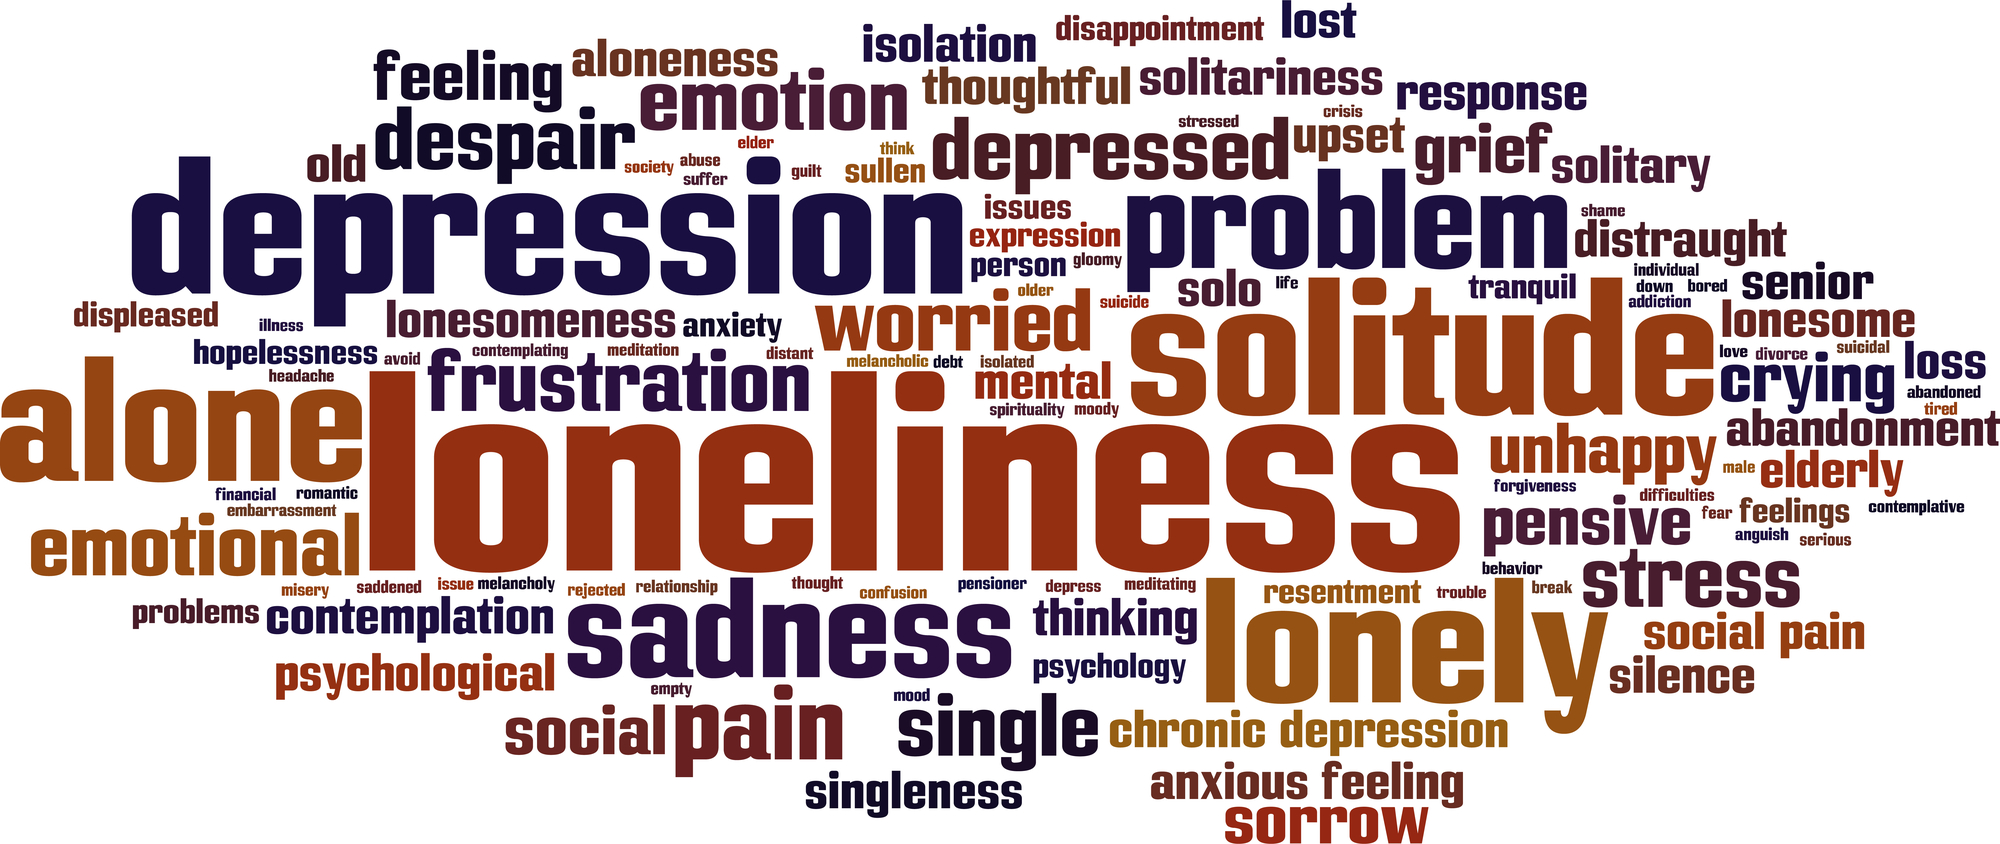 how to reduce loneliness for older adults